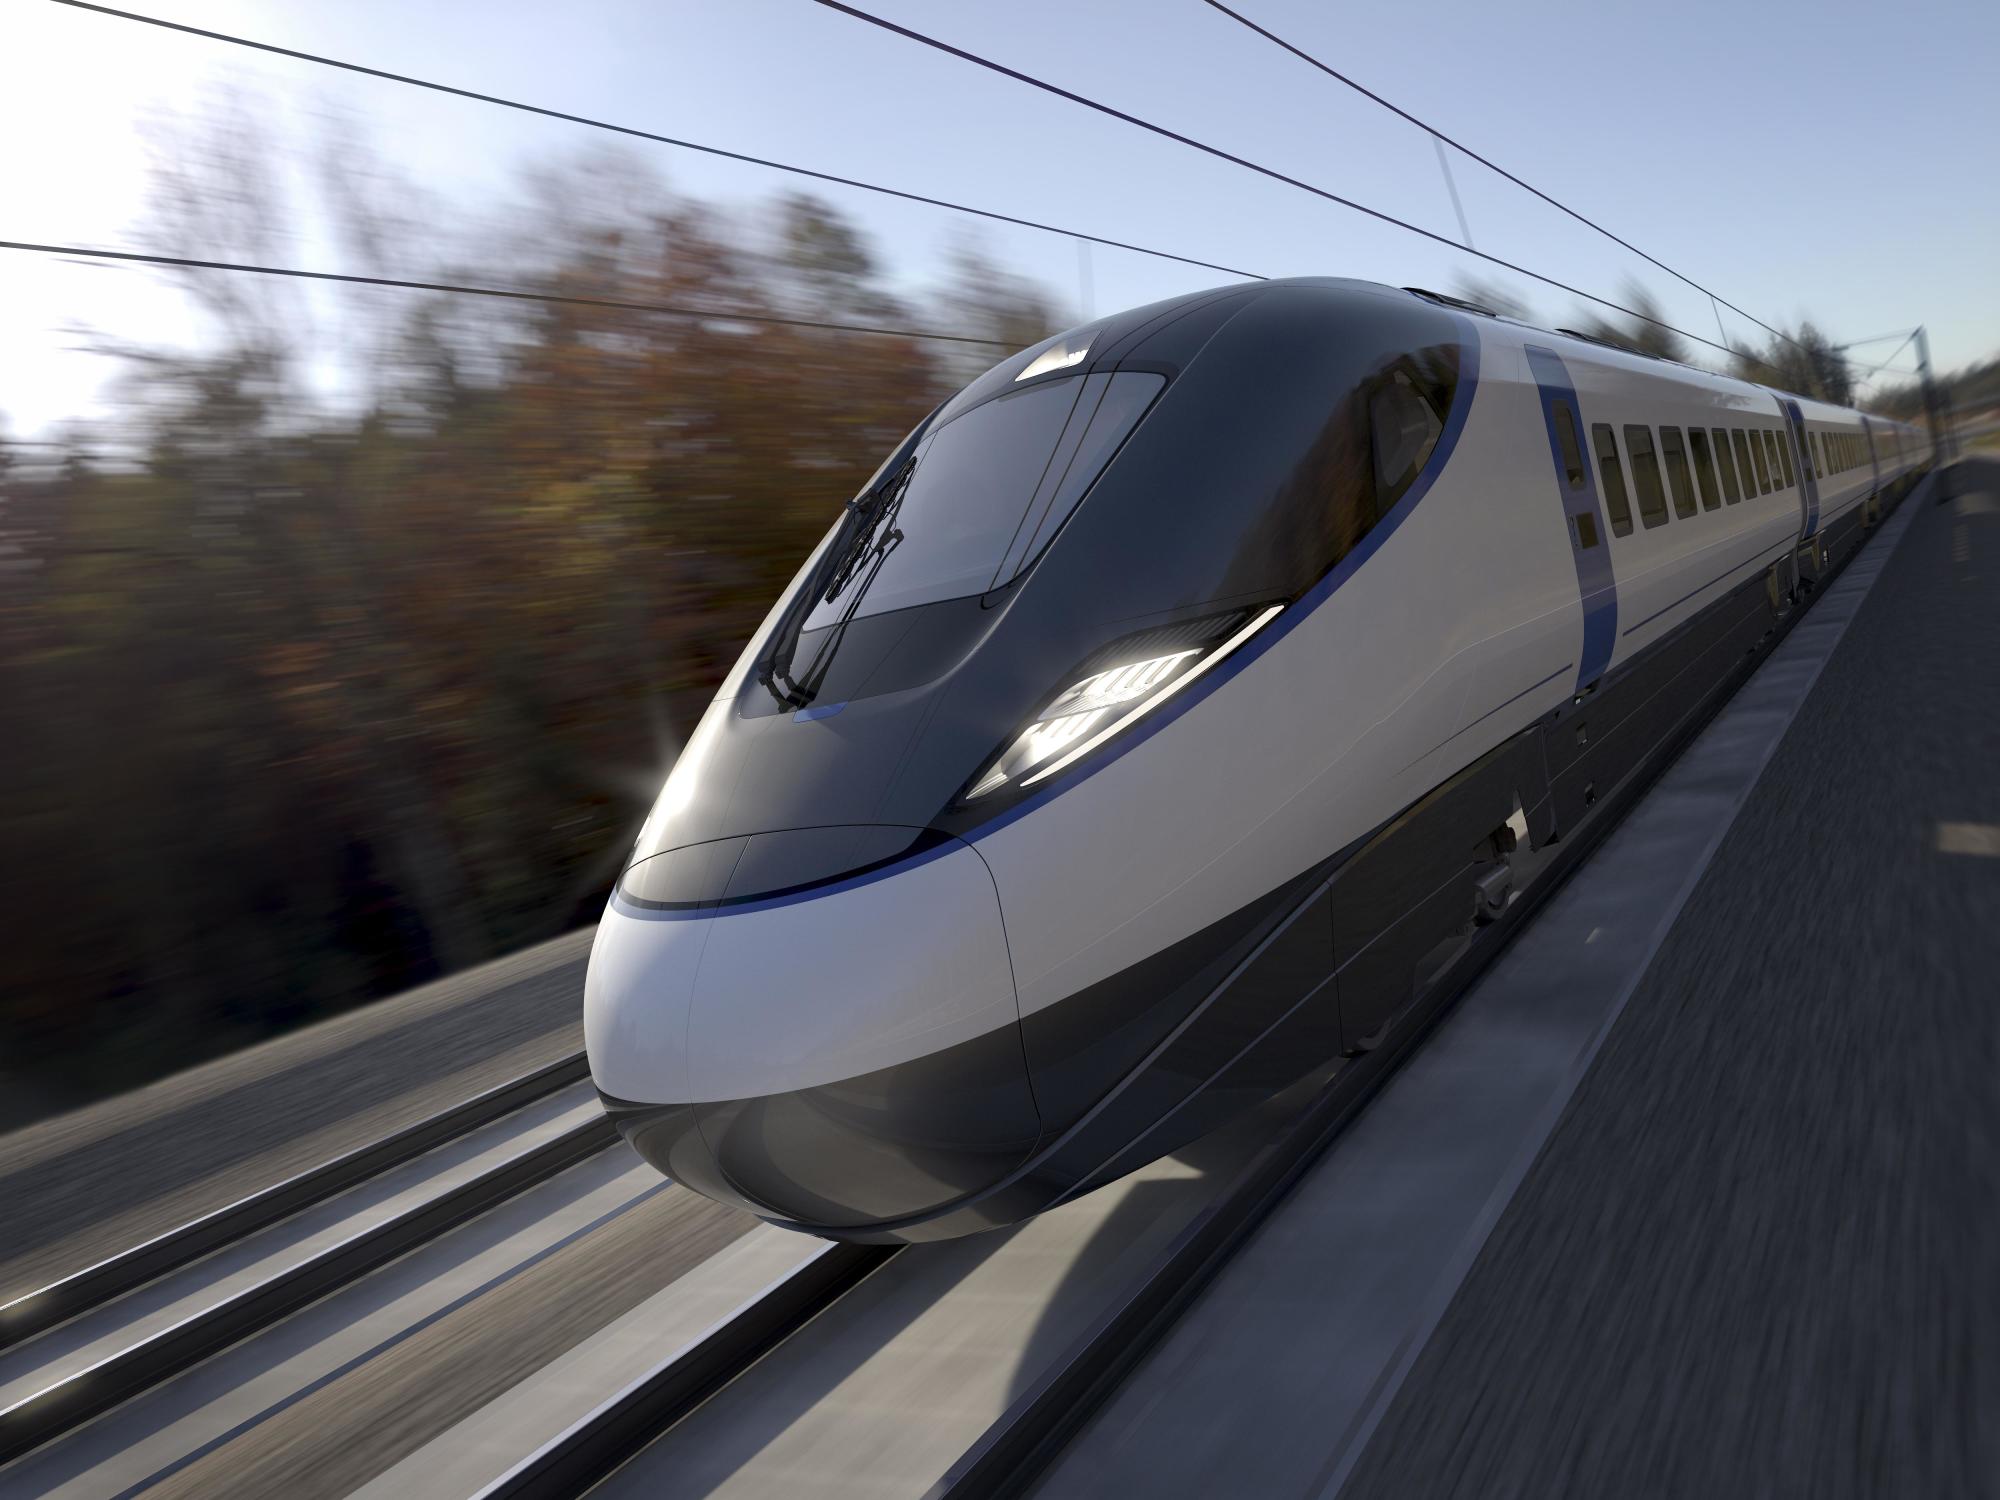 Bouygues and Equans to Withdraw One of Their HS2 Bids